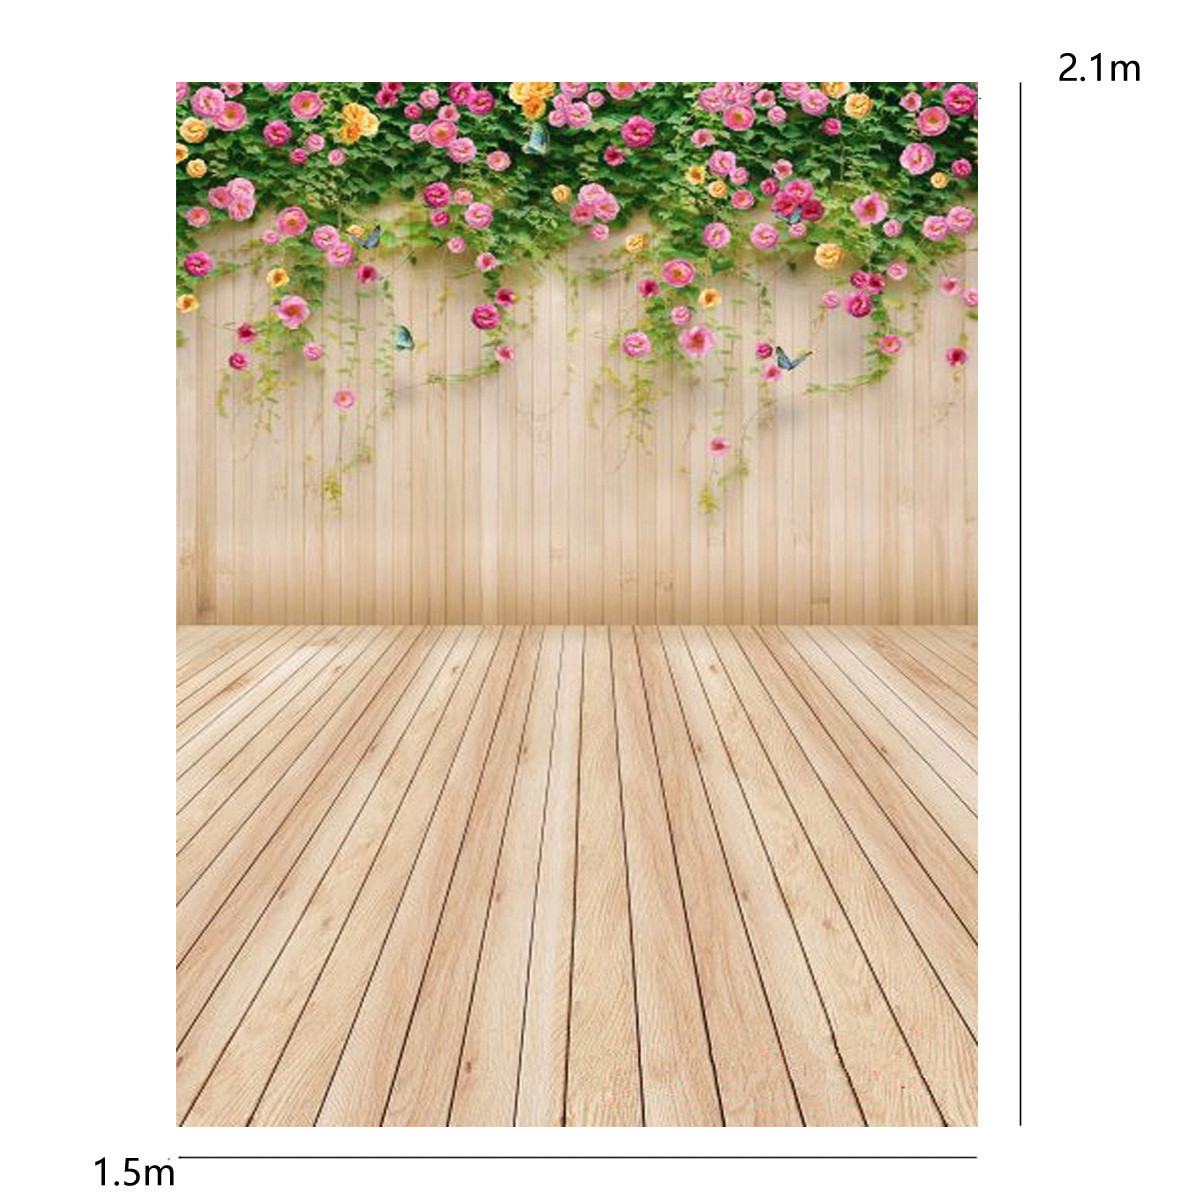 Mohoo-15x21m-Flowers-Wooden-Board-Studio-Props-Photography-Backdrop-Background-Silk-Material-1958137-8